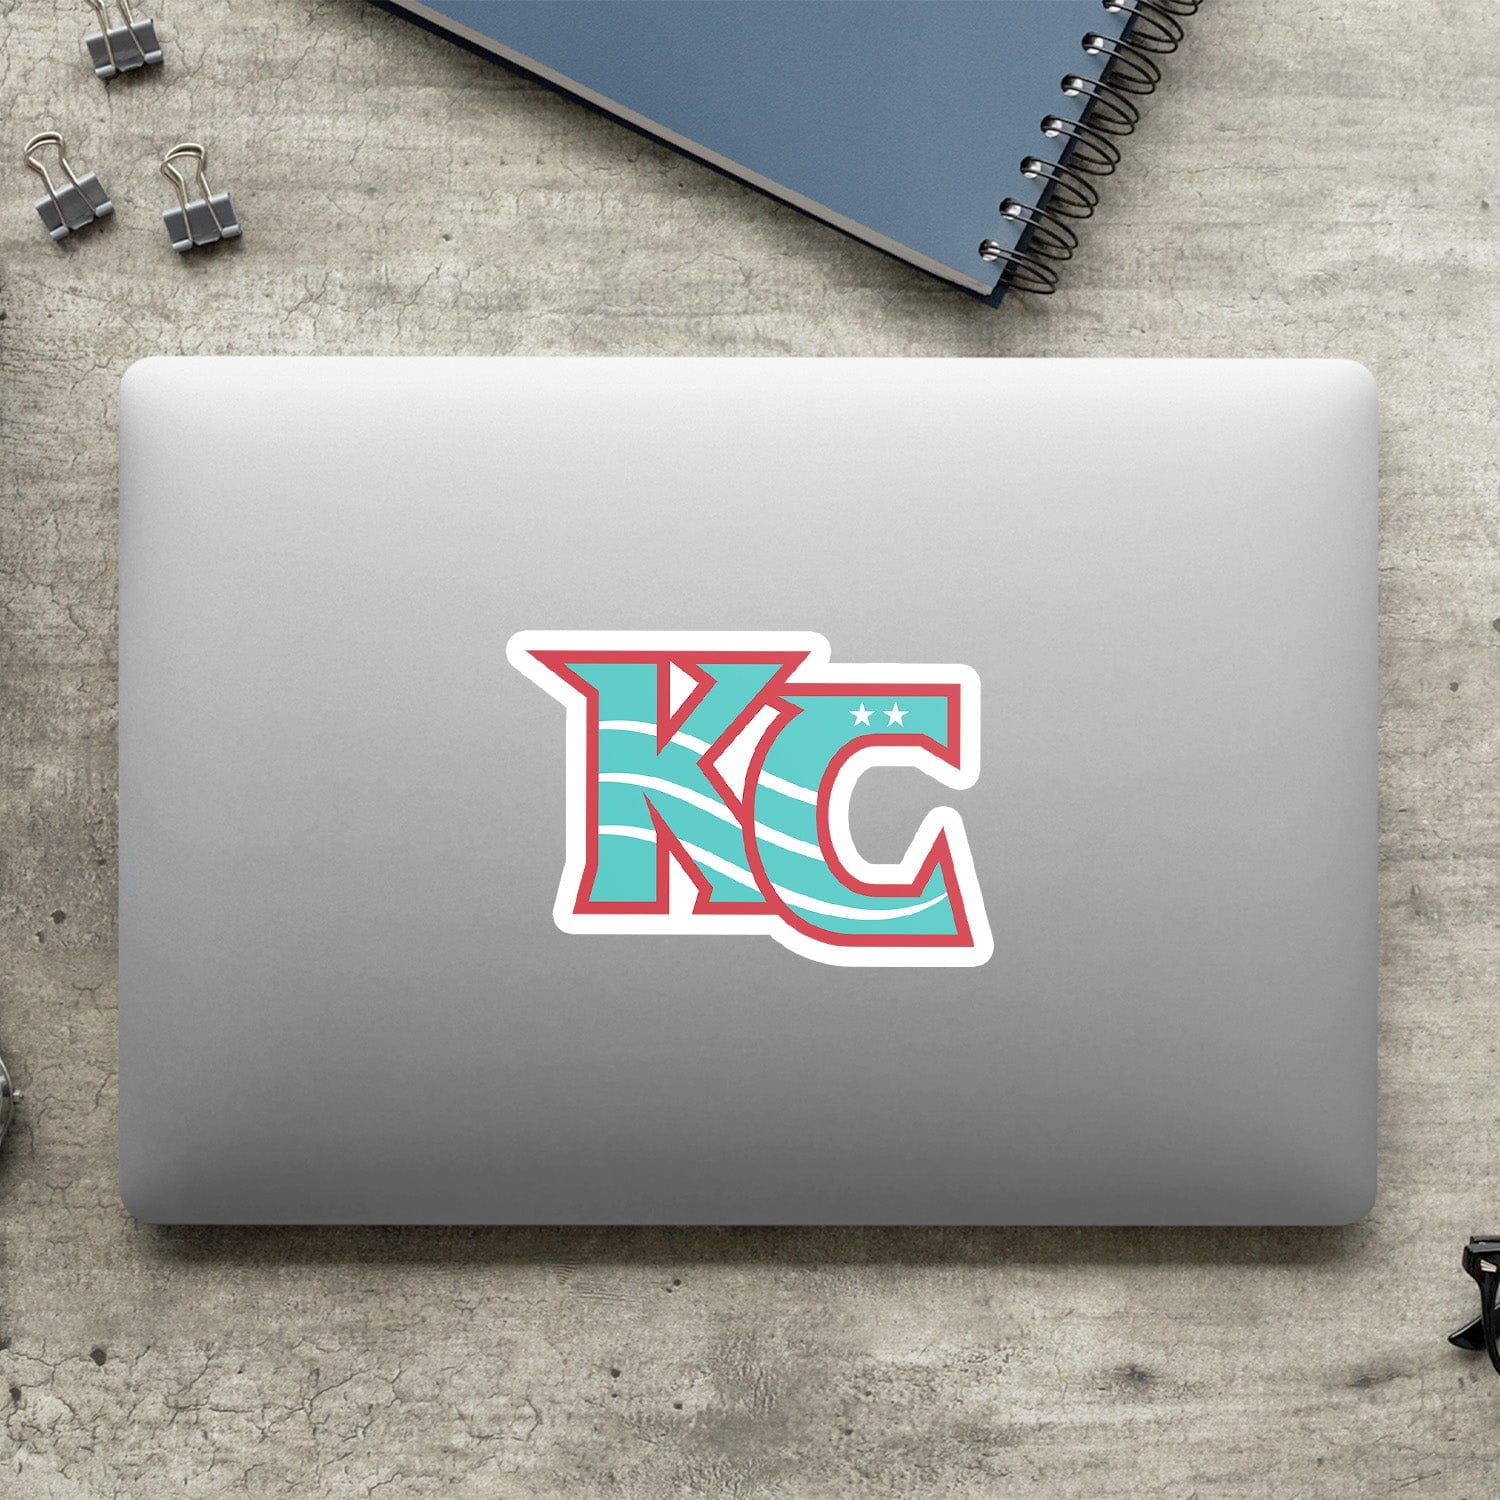 KC Swag Kansas City Current CURRENT KC die-cut sticker decal made from waterproof vinyl on closed laptop back